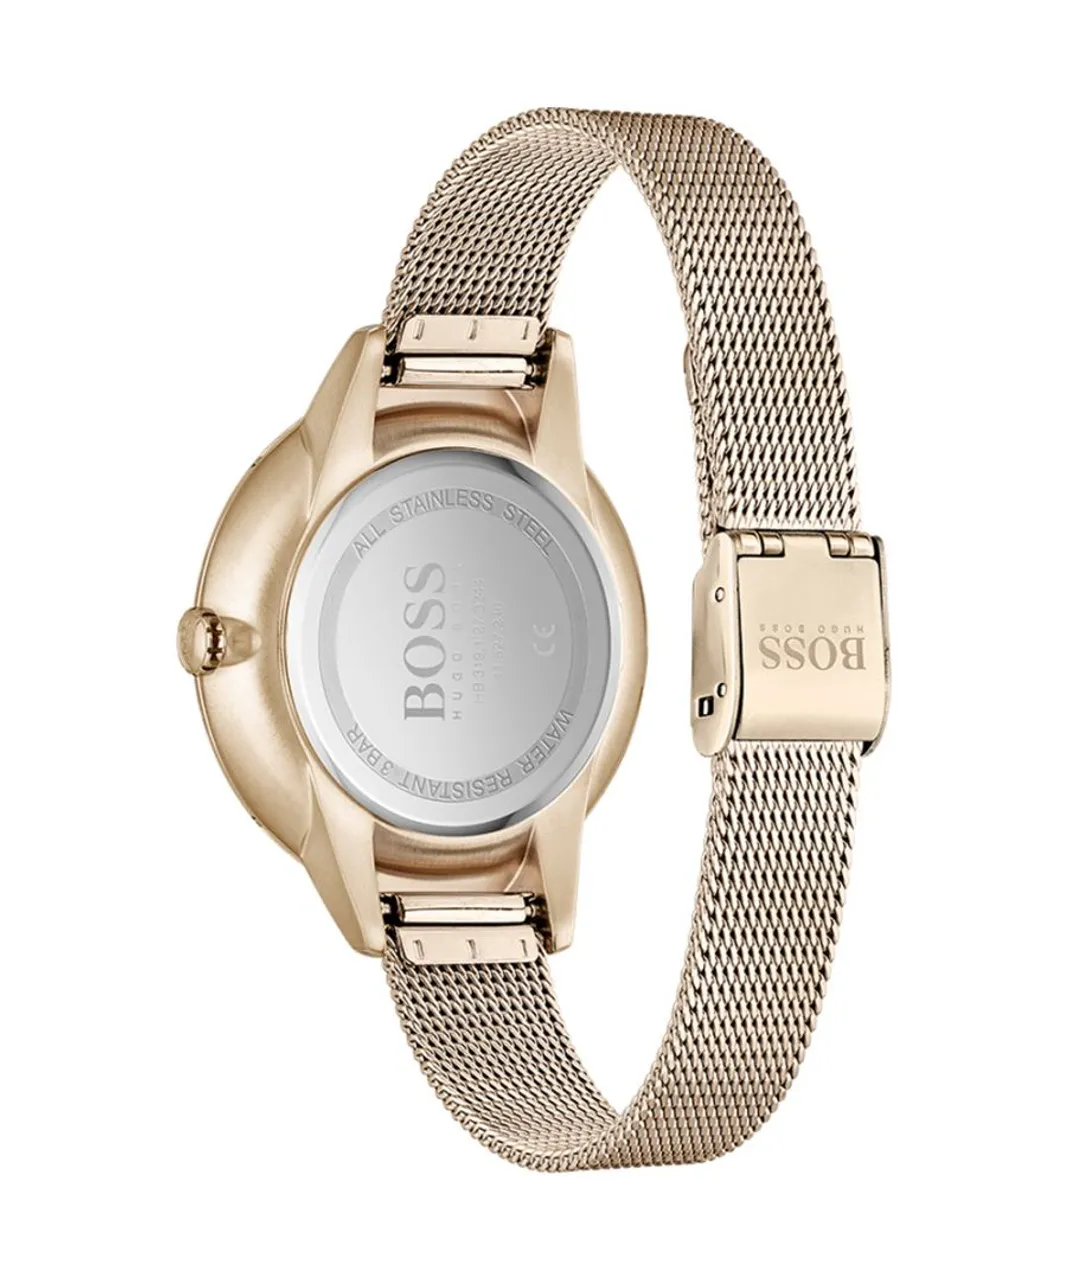 Hugo Boss Symphony WoMens Rose Gold Watch 1502613 Stainless Steel - One Size